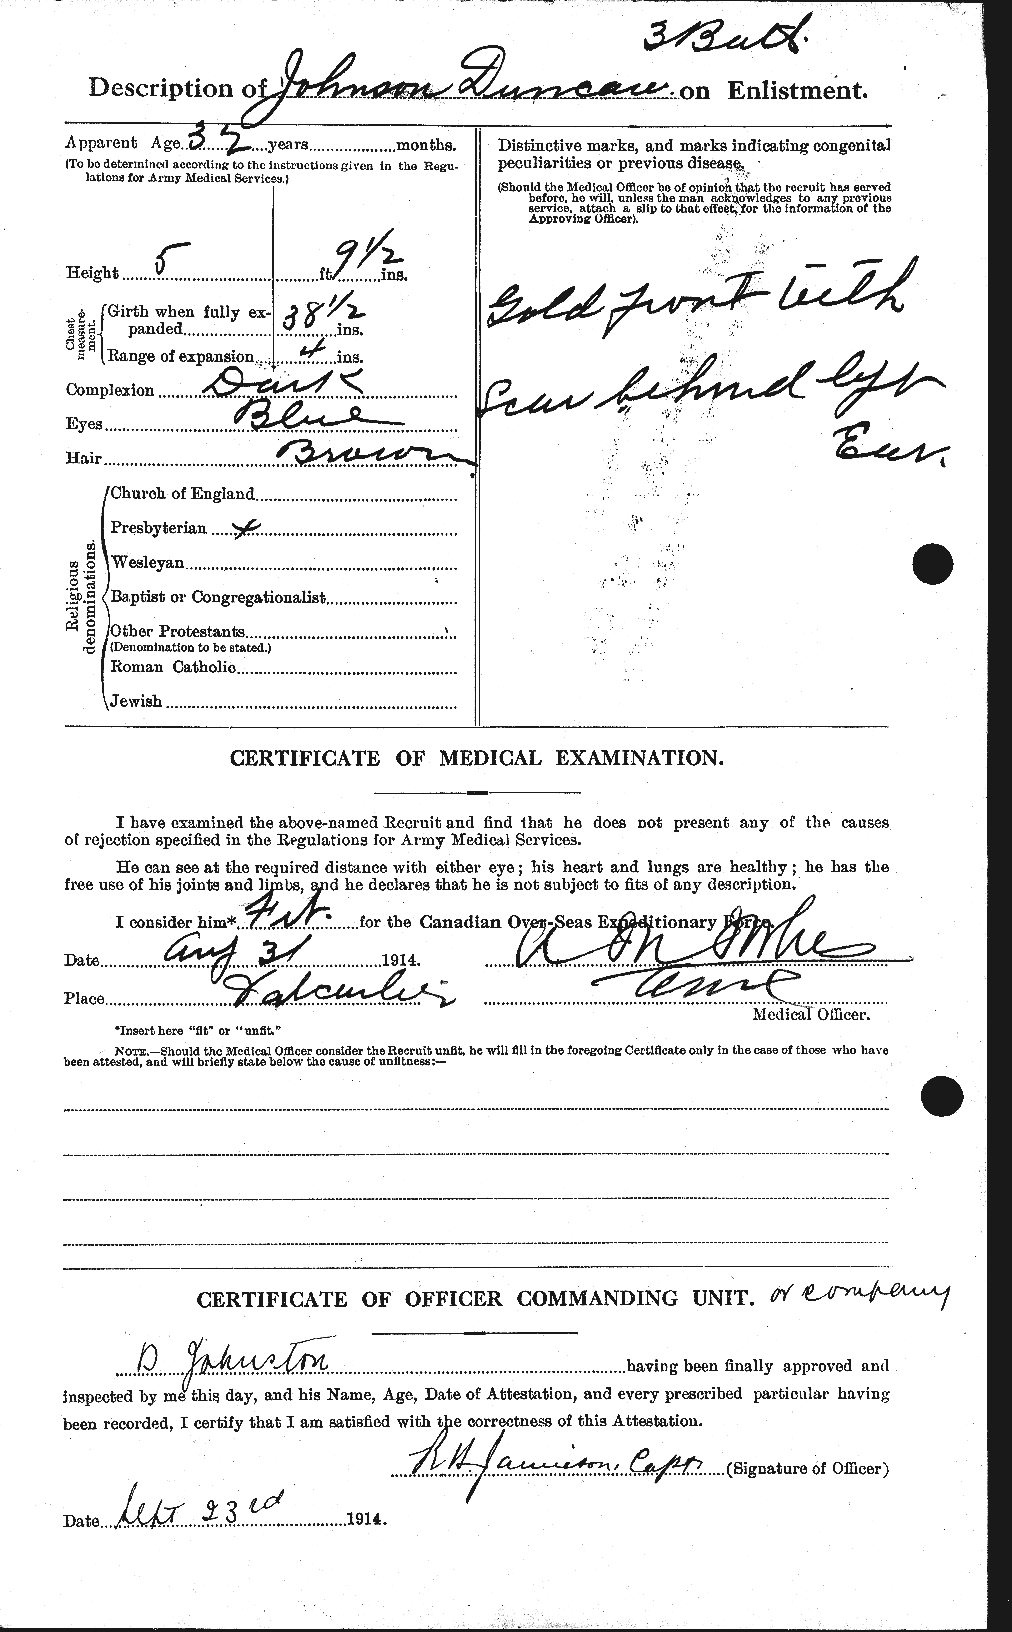 Personnel Records of the First World War - CEF 423187b